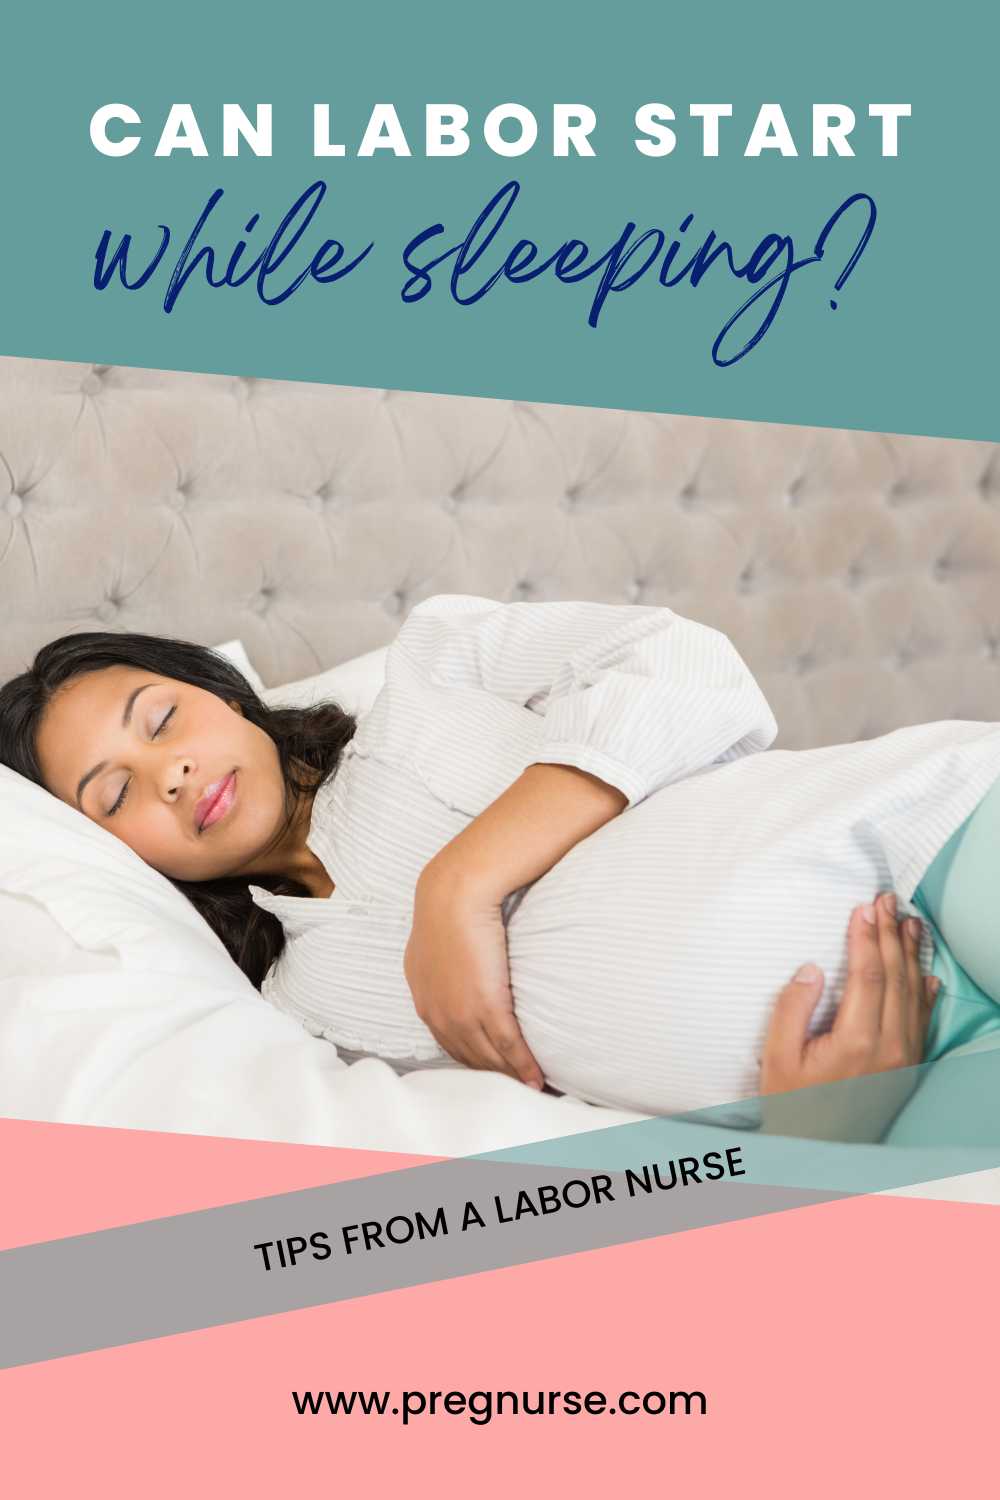 Can labor start while you're sleeping? Can you sleep through early labor? How can you sleep through some of labor. Let's explore those topics.